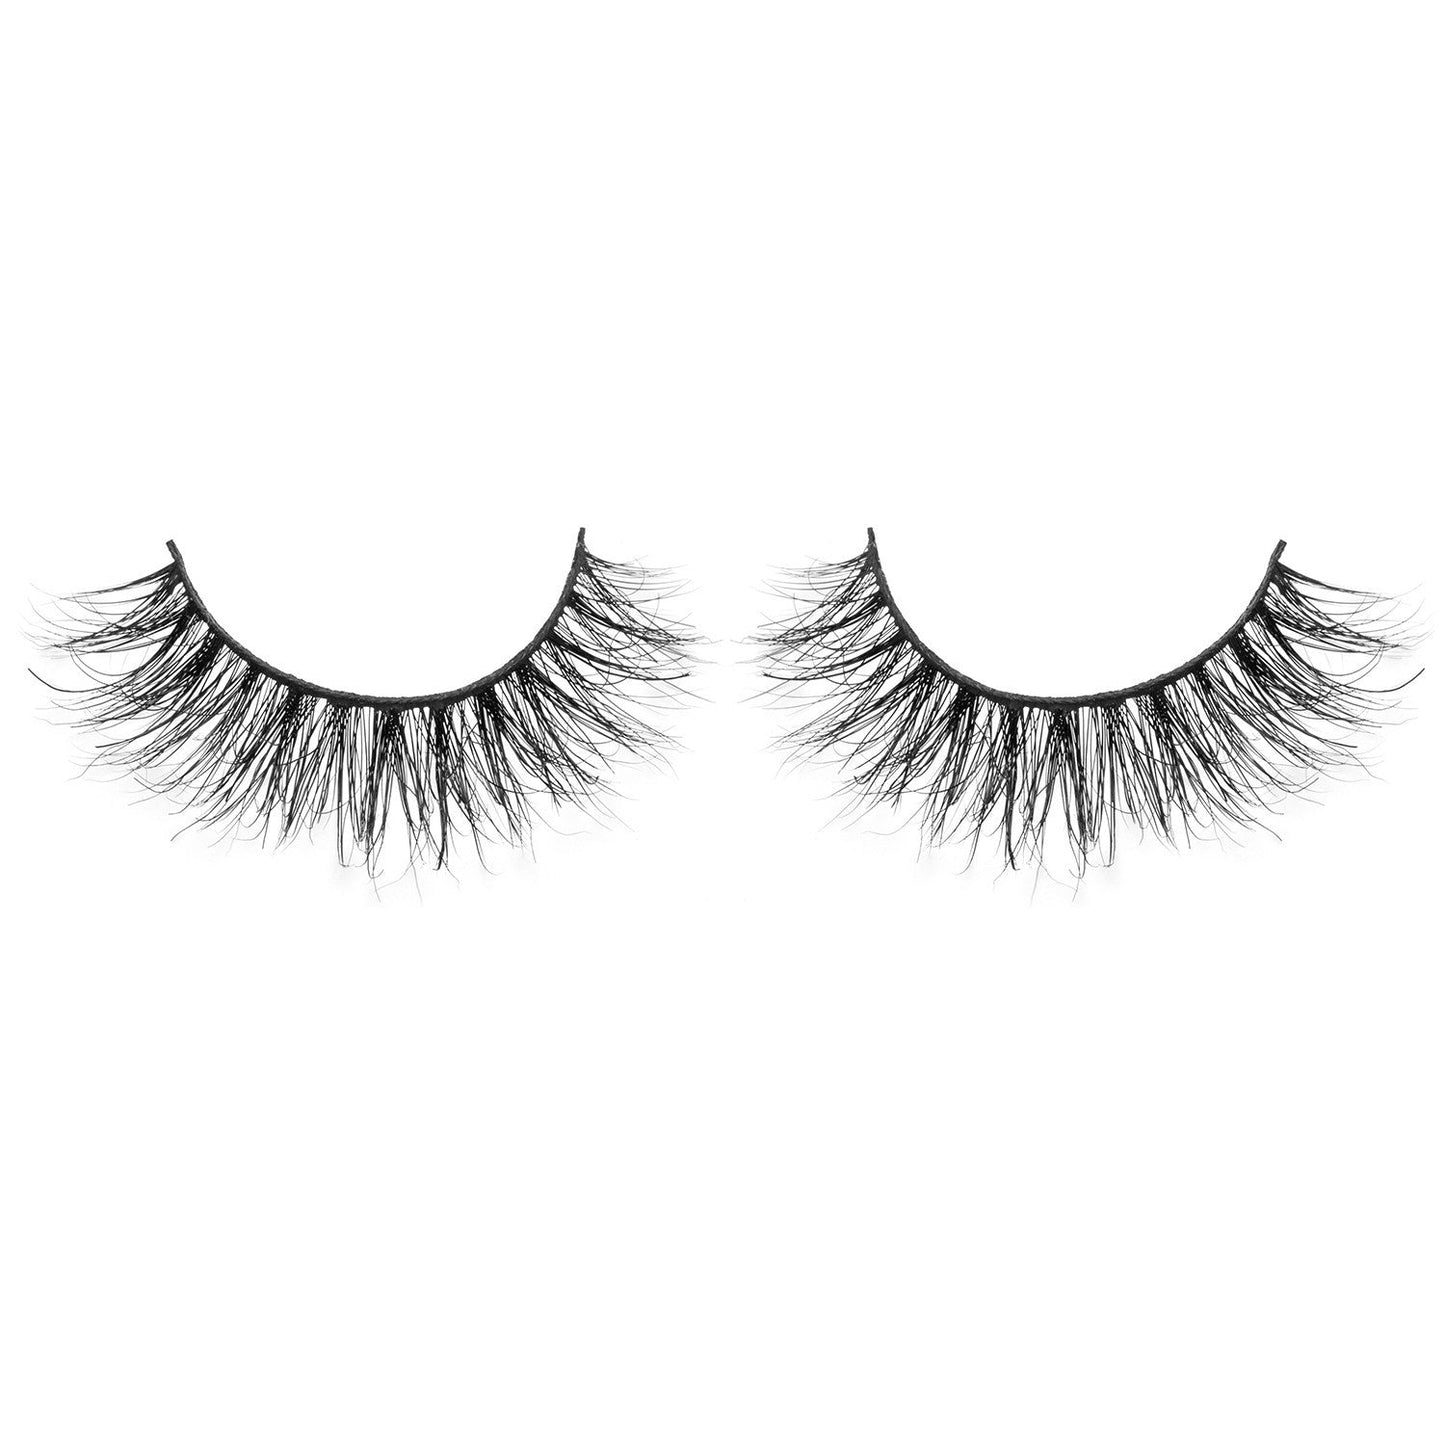 3D Mink Eyelashes - Subscribe